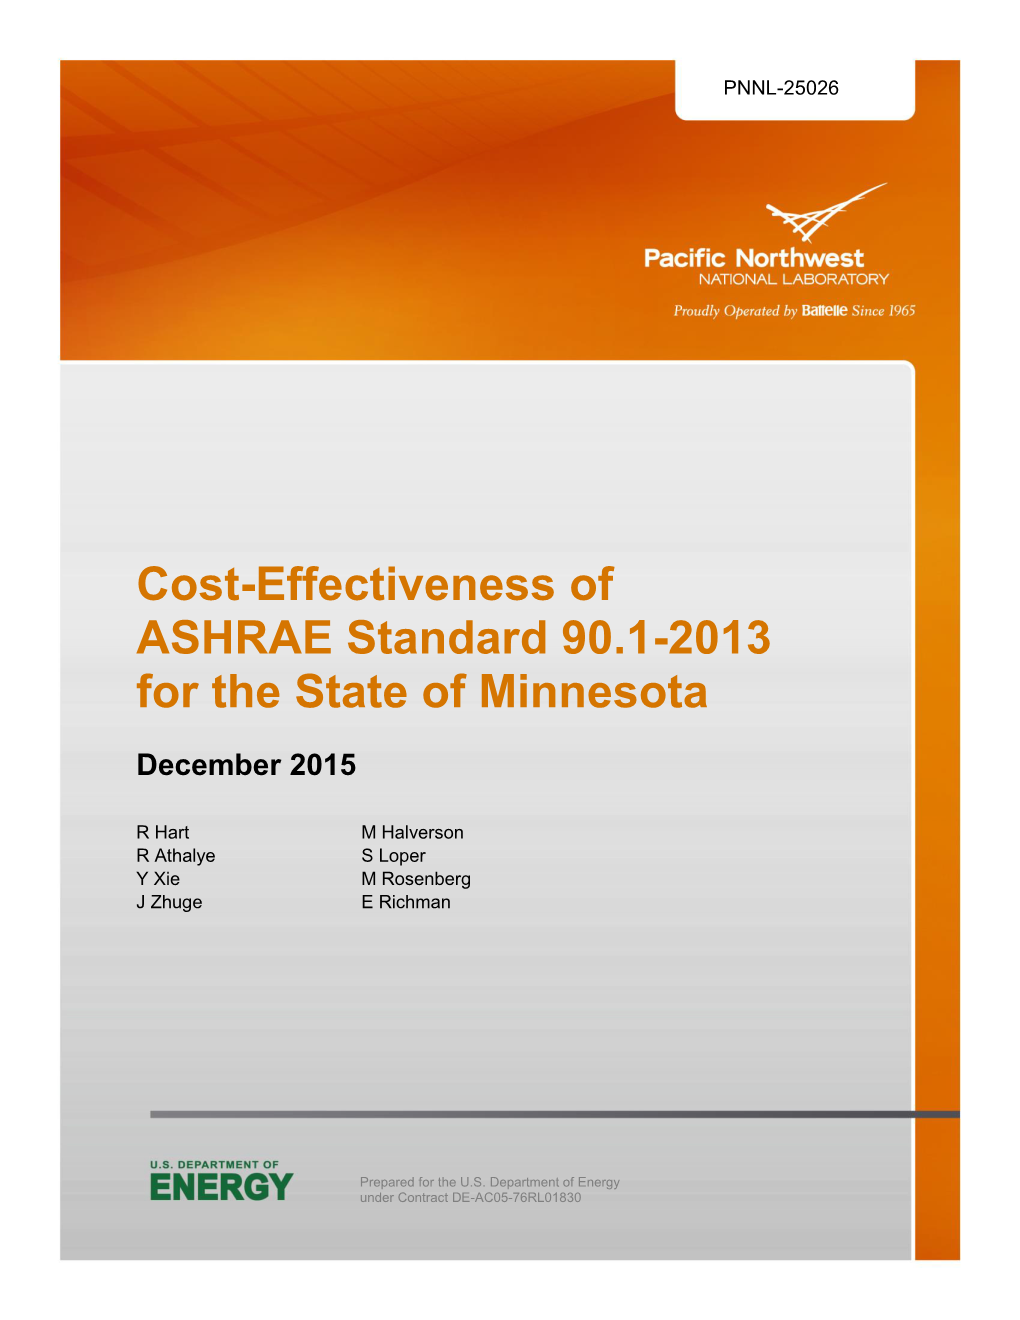 Cost Effectiveness of ASHRAE Standard 90.1-2013 for the State Of